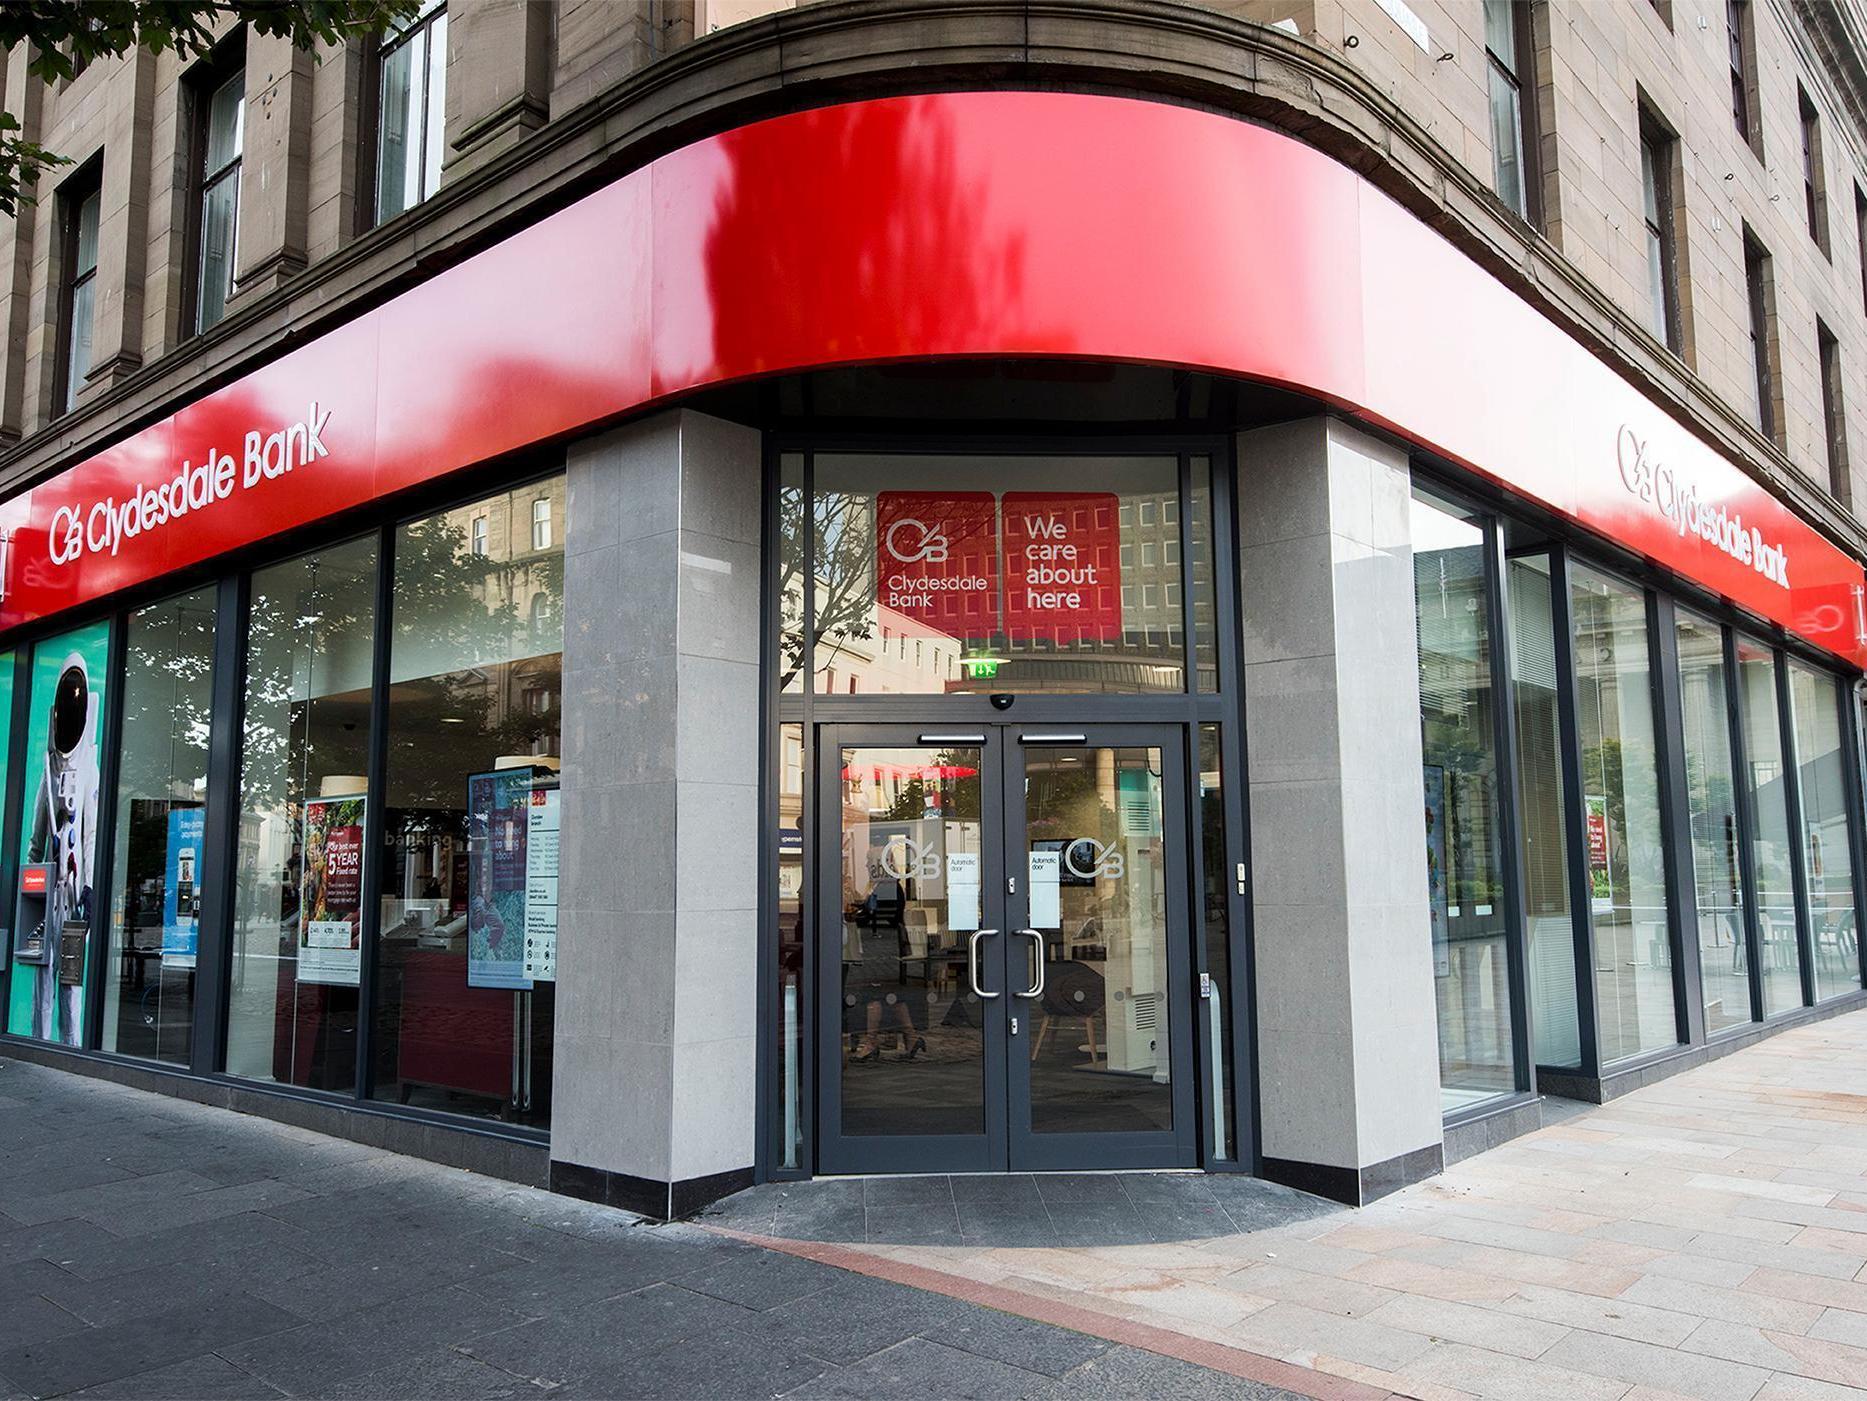 Clydesdale took over Virgin Money earlier this year